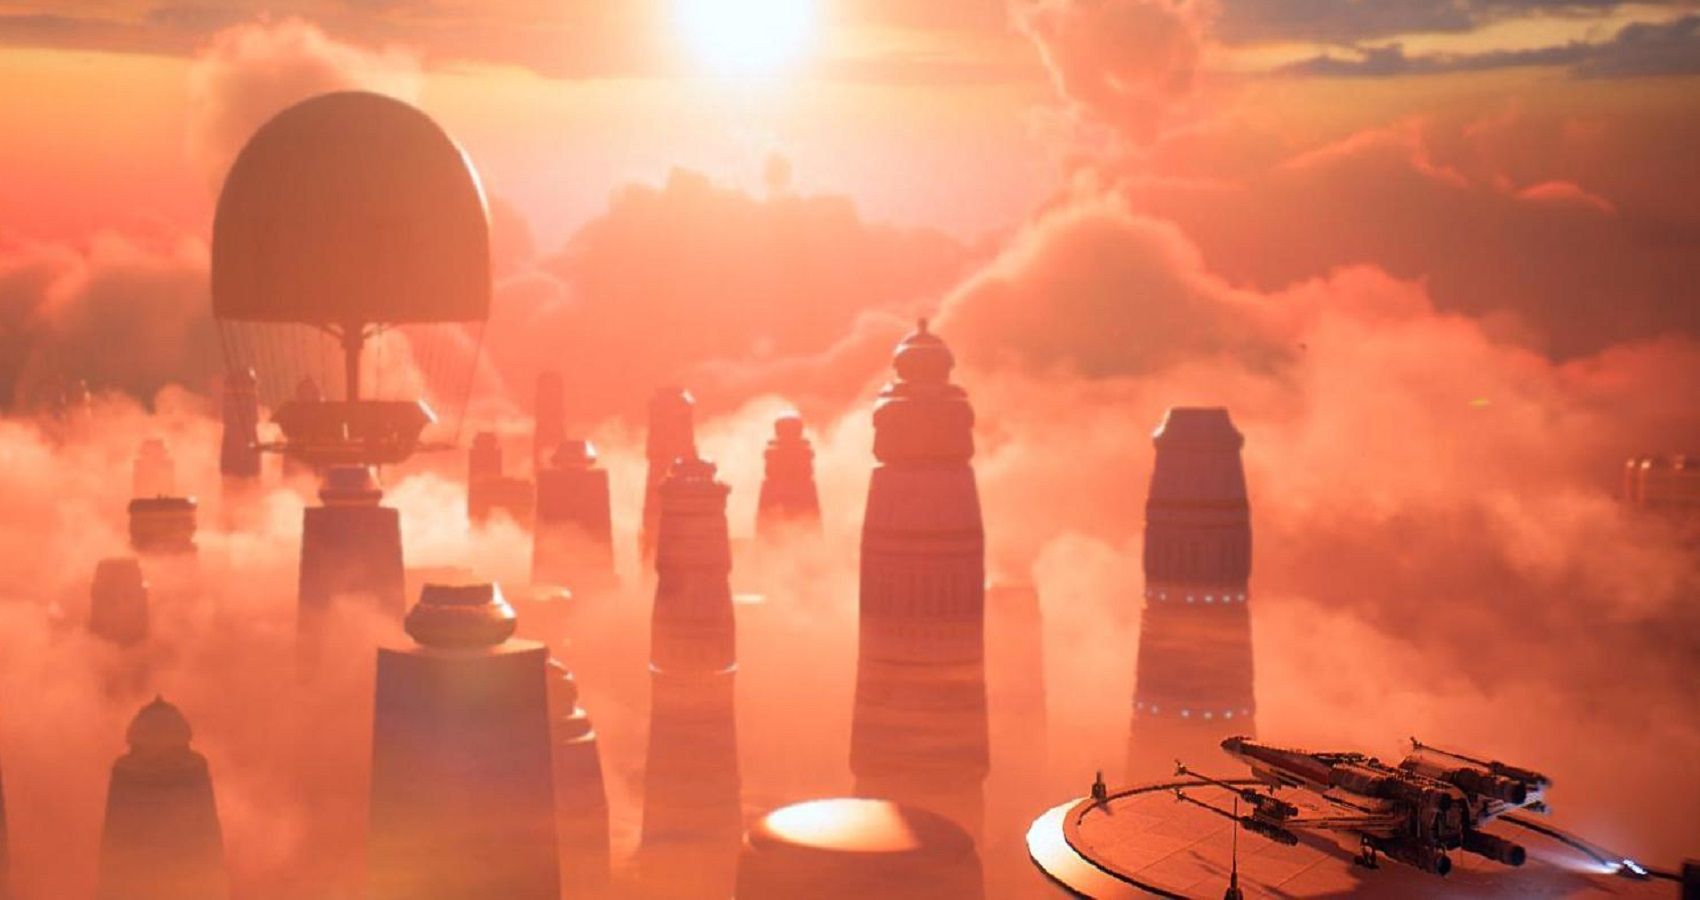 Bespin landscape with buildings and clouds